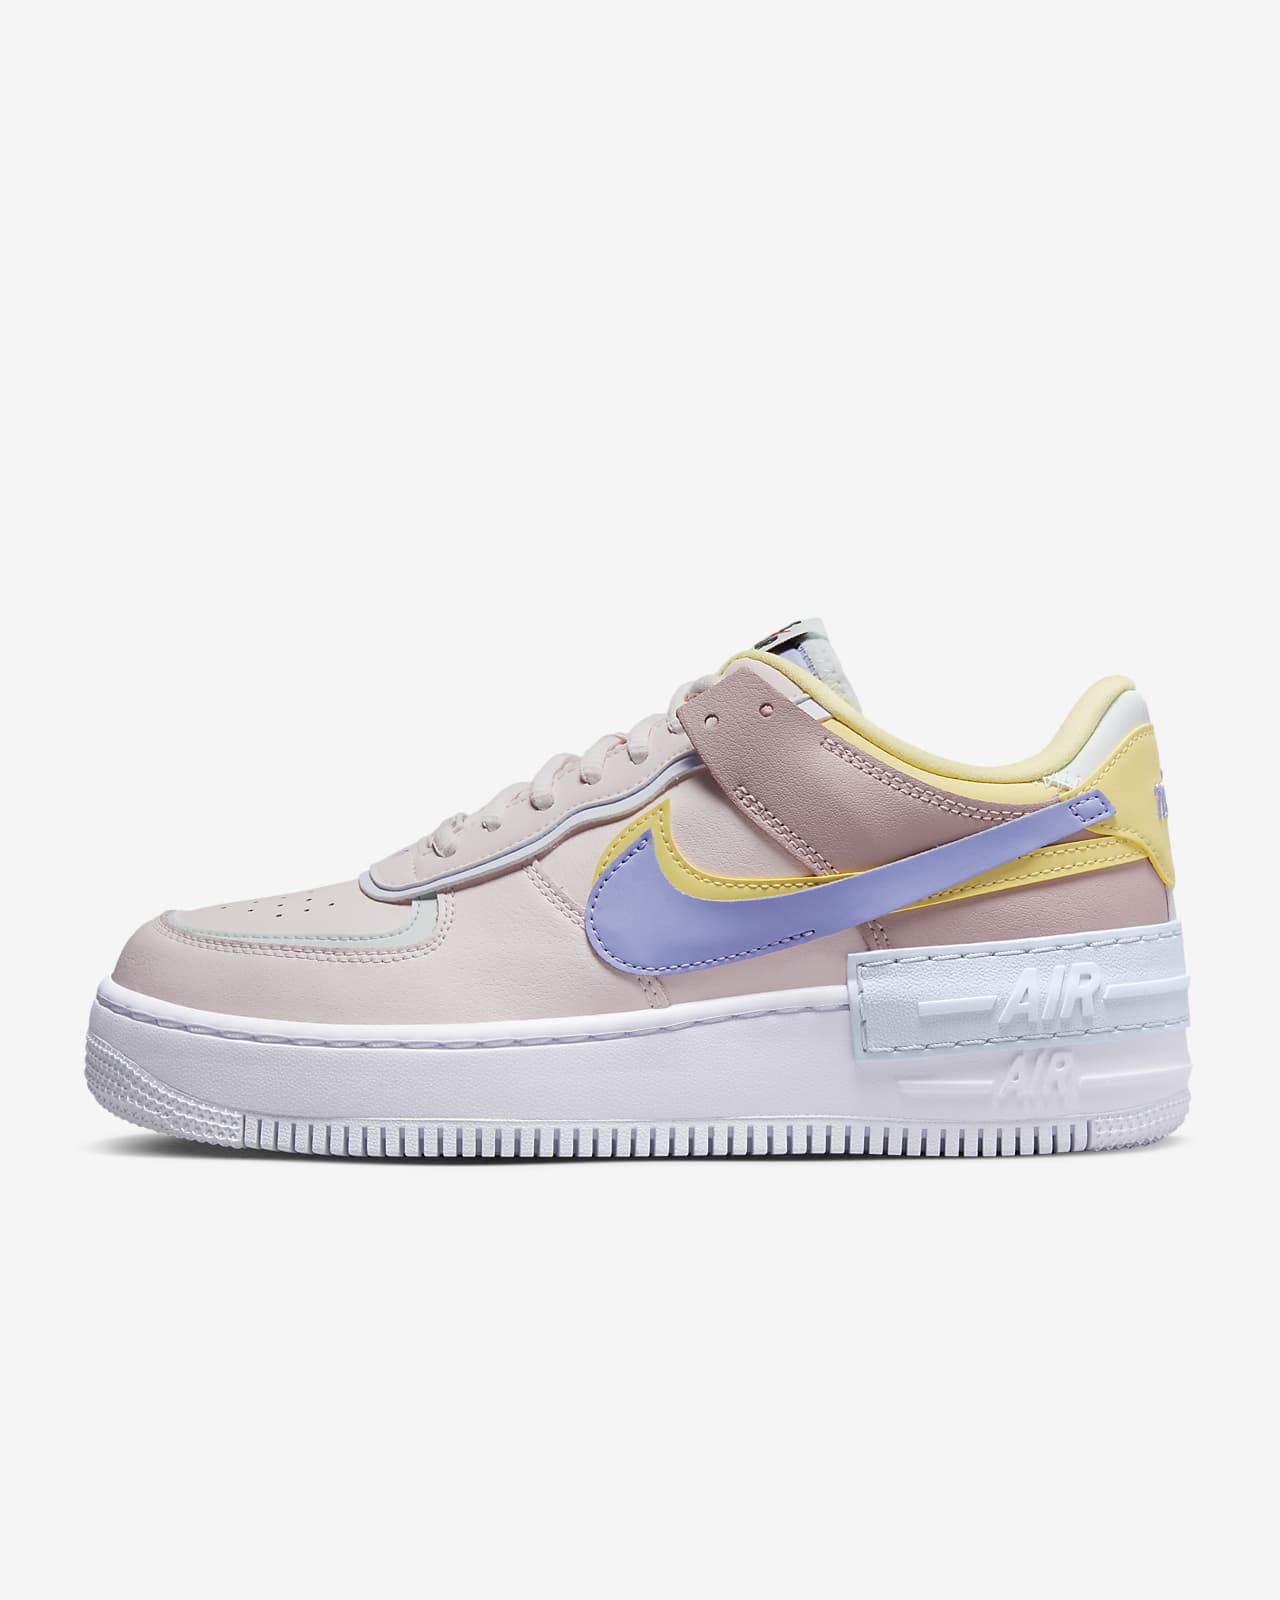 Provisional counter Junction Nike Air Force 1 Shadow Women's Shoes. Nike.com